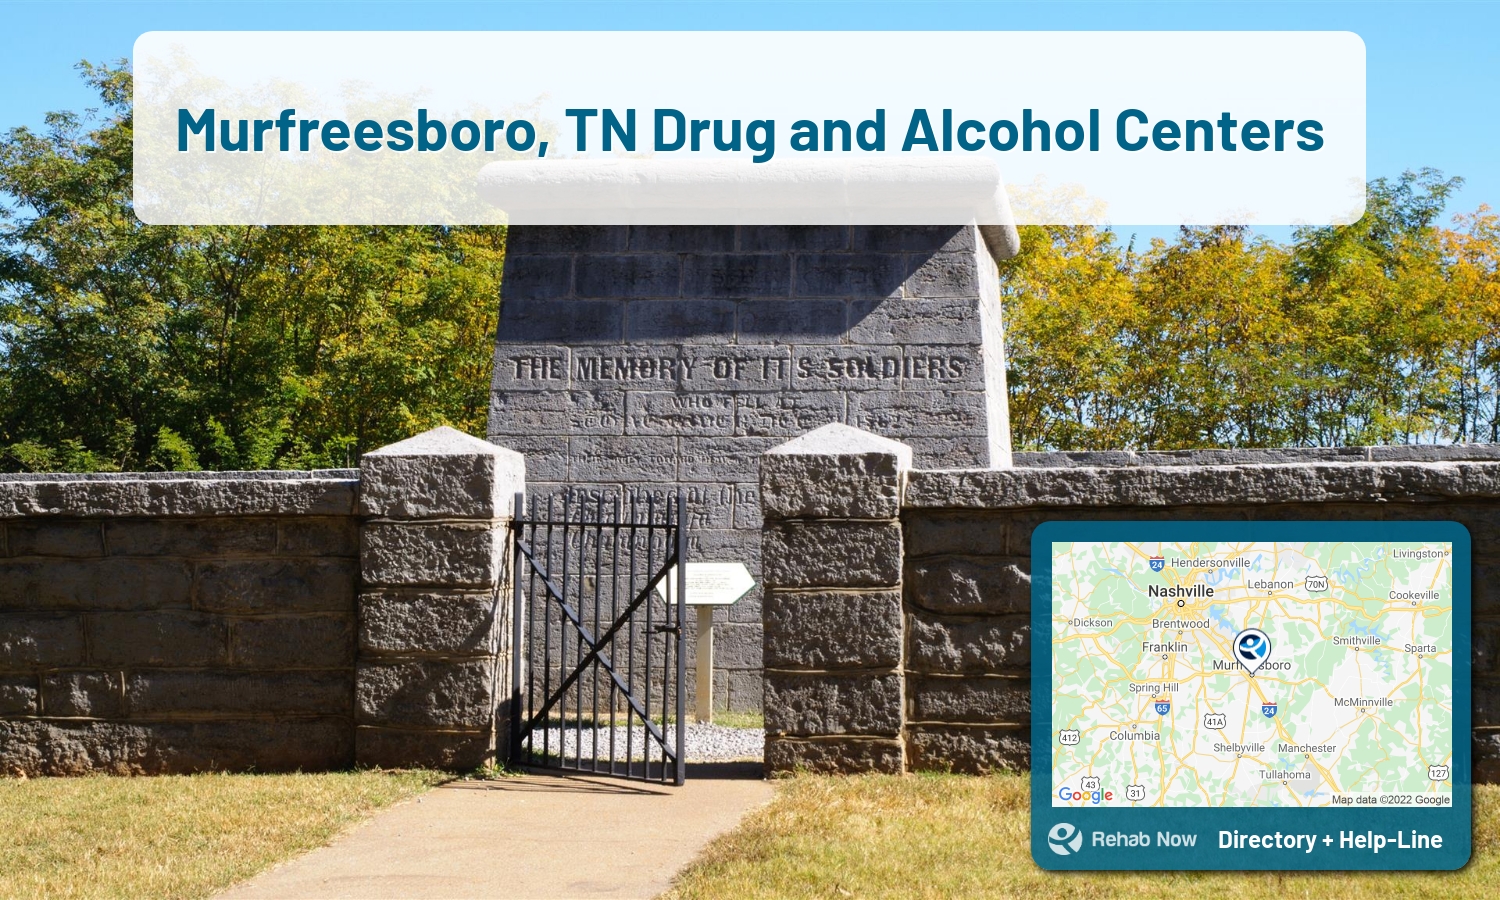 Drug rehab and alcohol treatment services nearby Murfreesboro, TN. Need help choosing a treatment program? Call our free hotline!